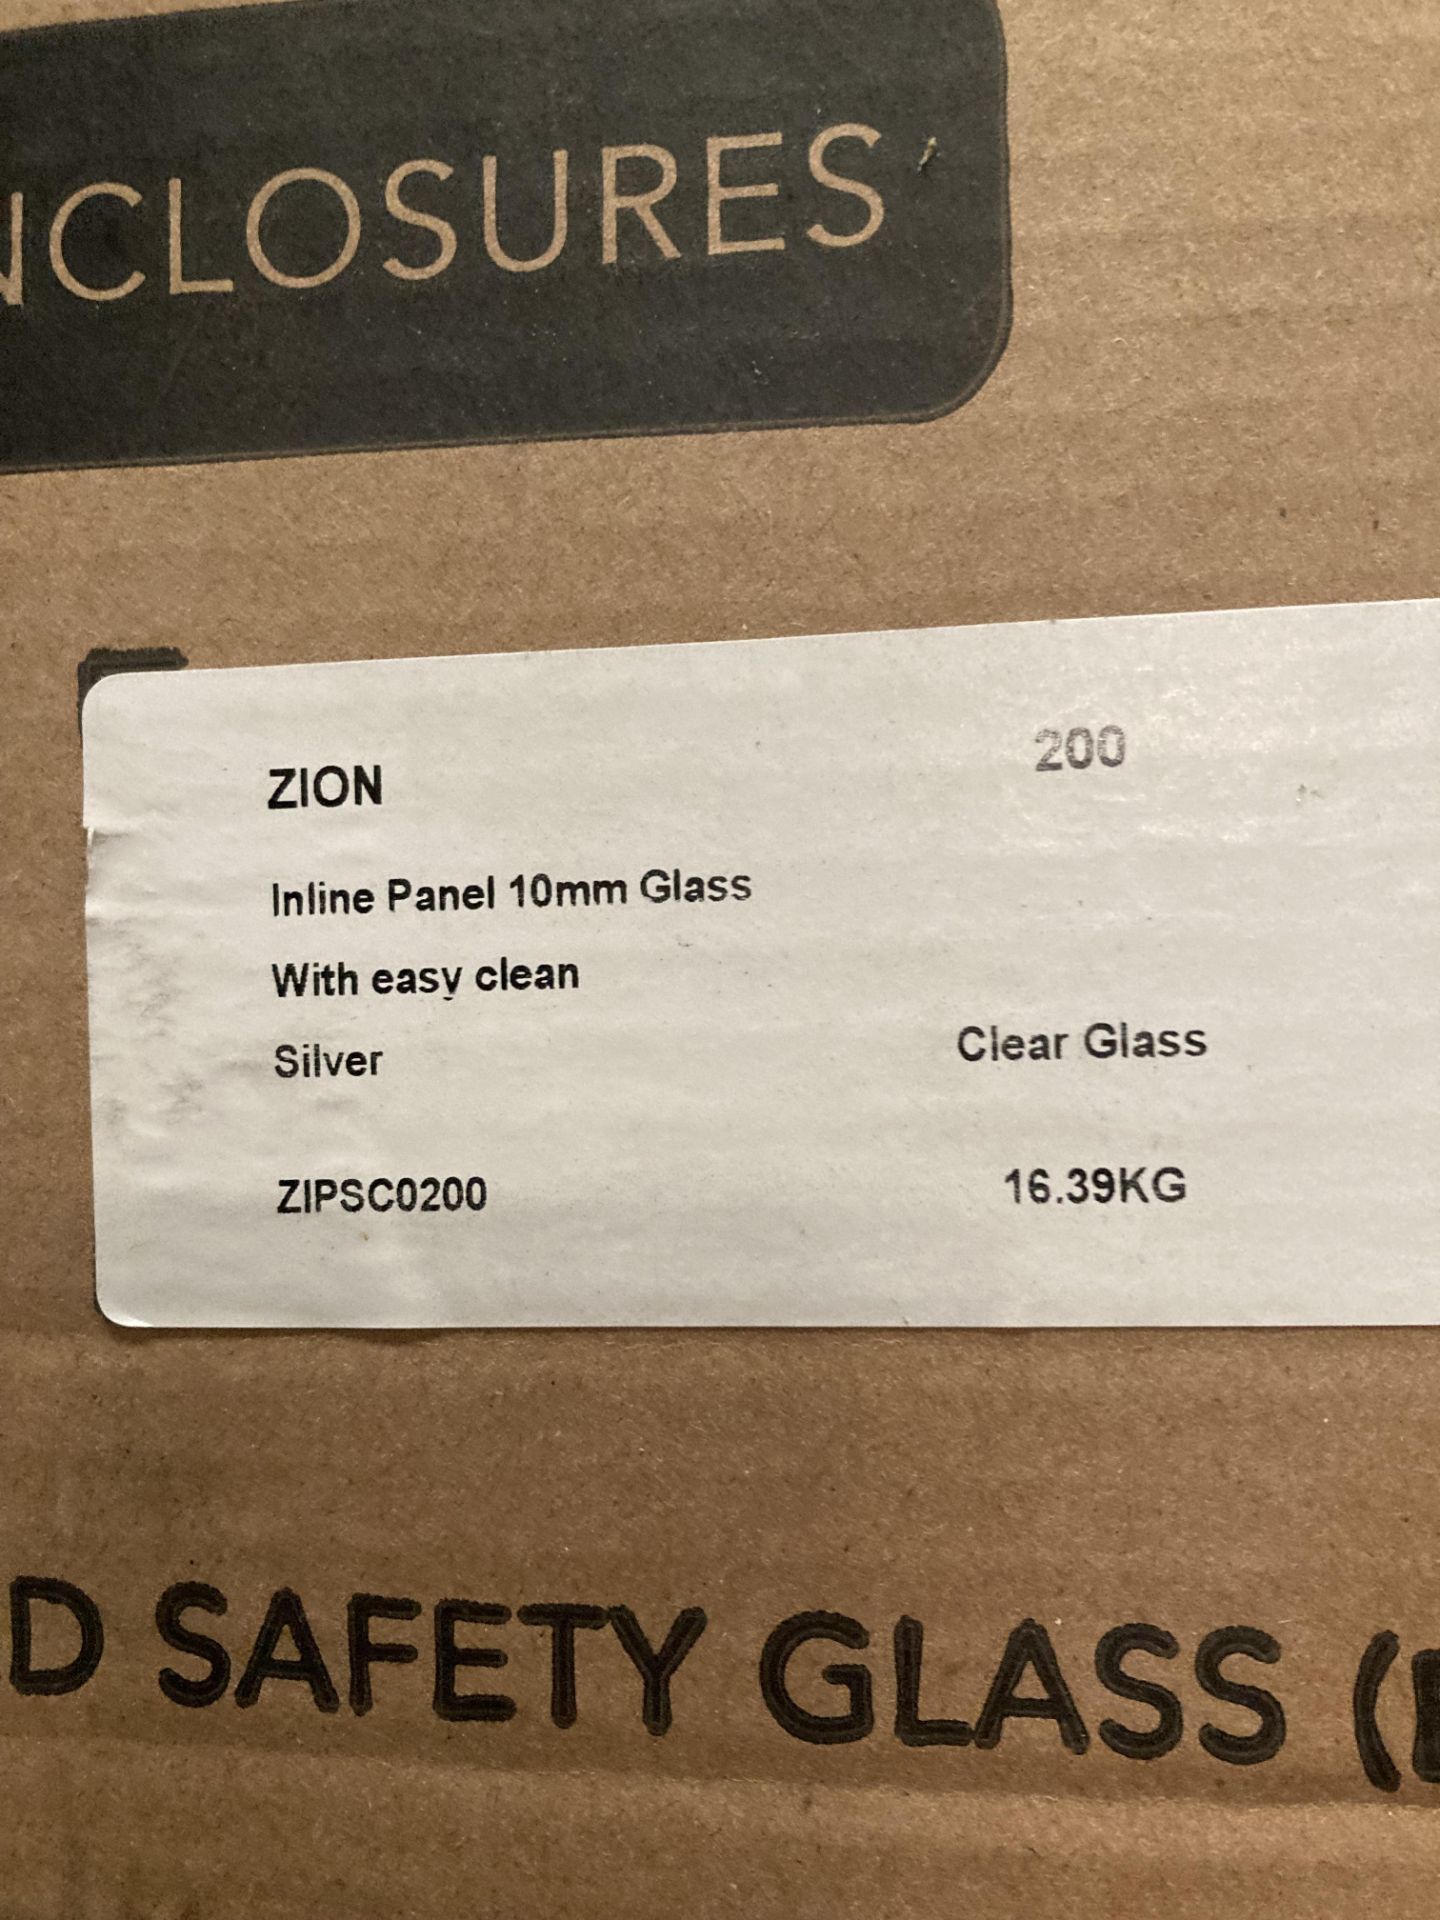 Simpsons Zion 200 inline panel 10mm glass with easy clean in silver (saleroom location: QL03) - Image 2 of 2